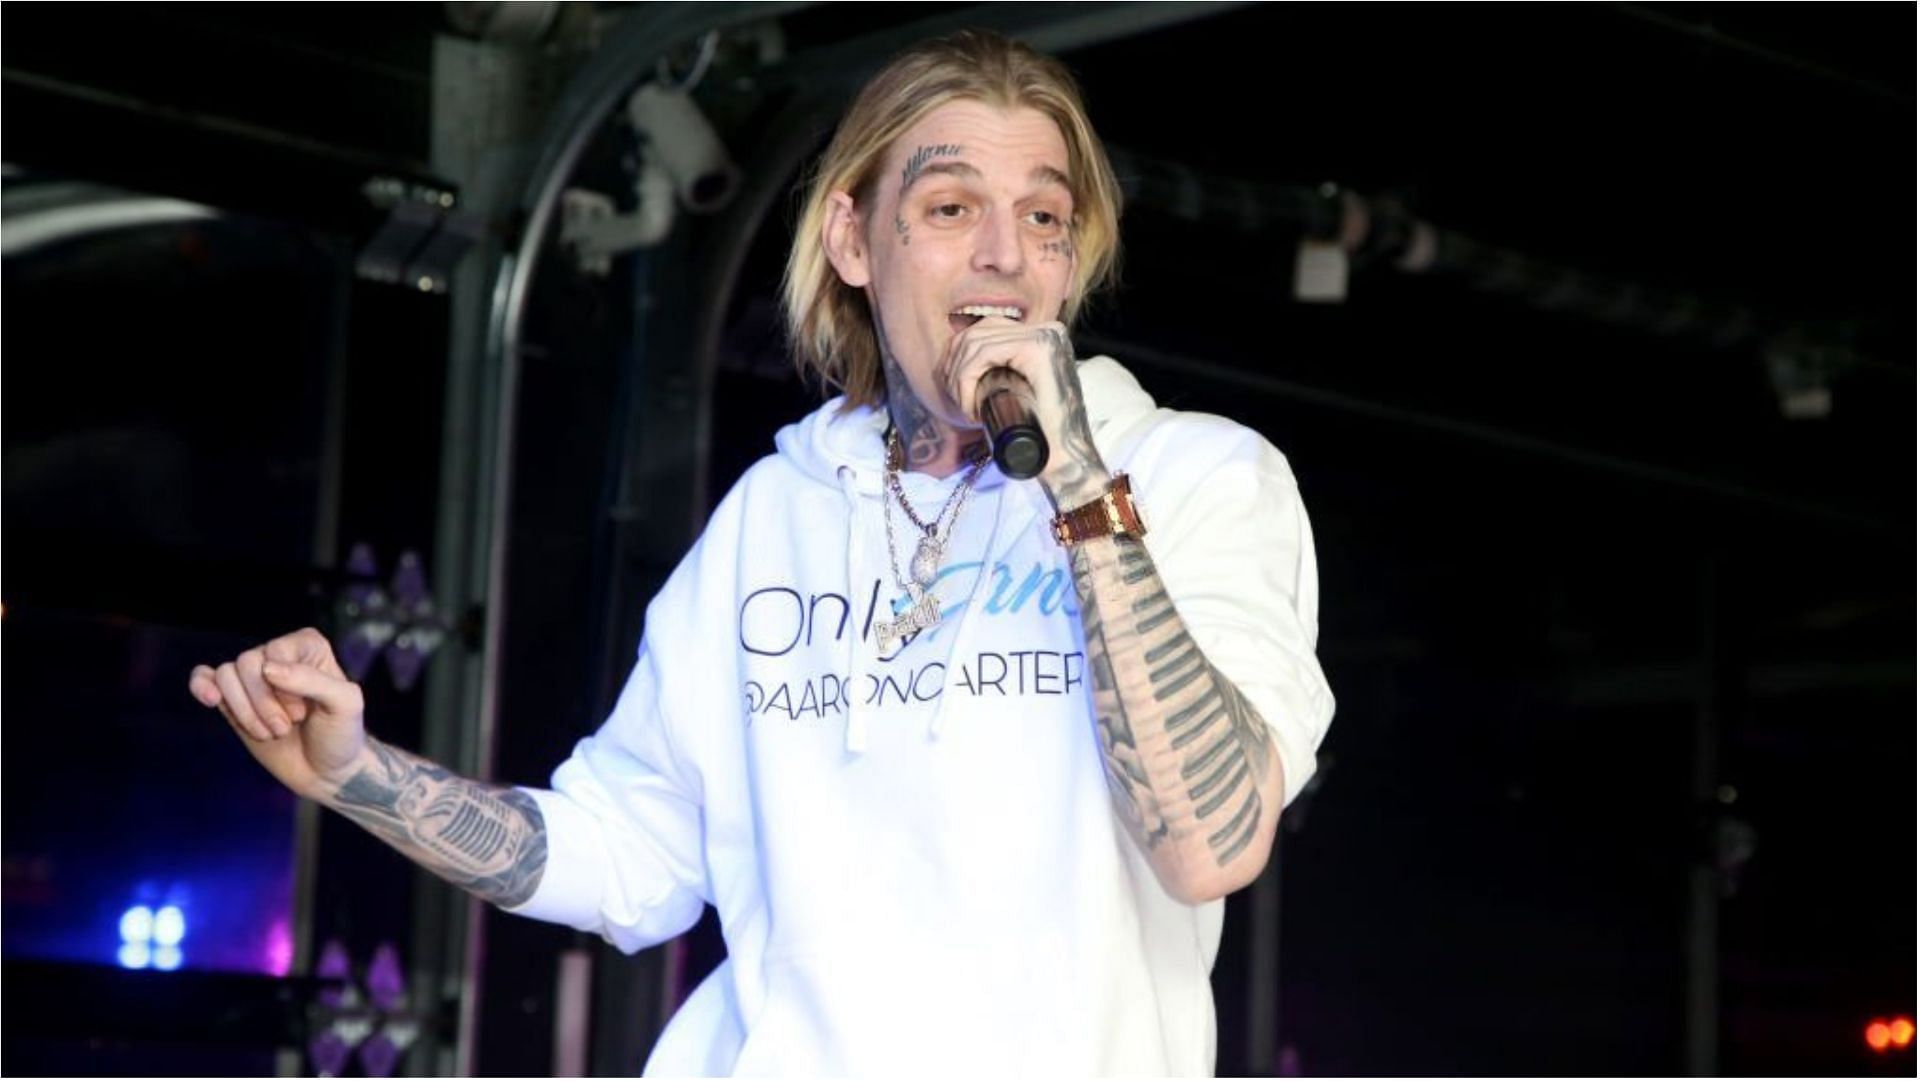 Aaron Carter died recently at the age of 34 (Image via Gabe Ginsberg/Getty Images)